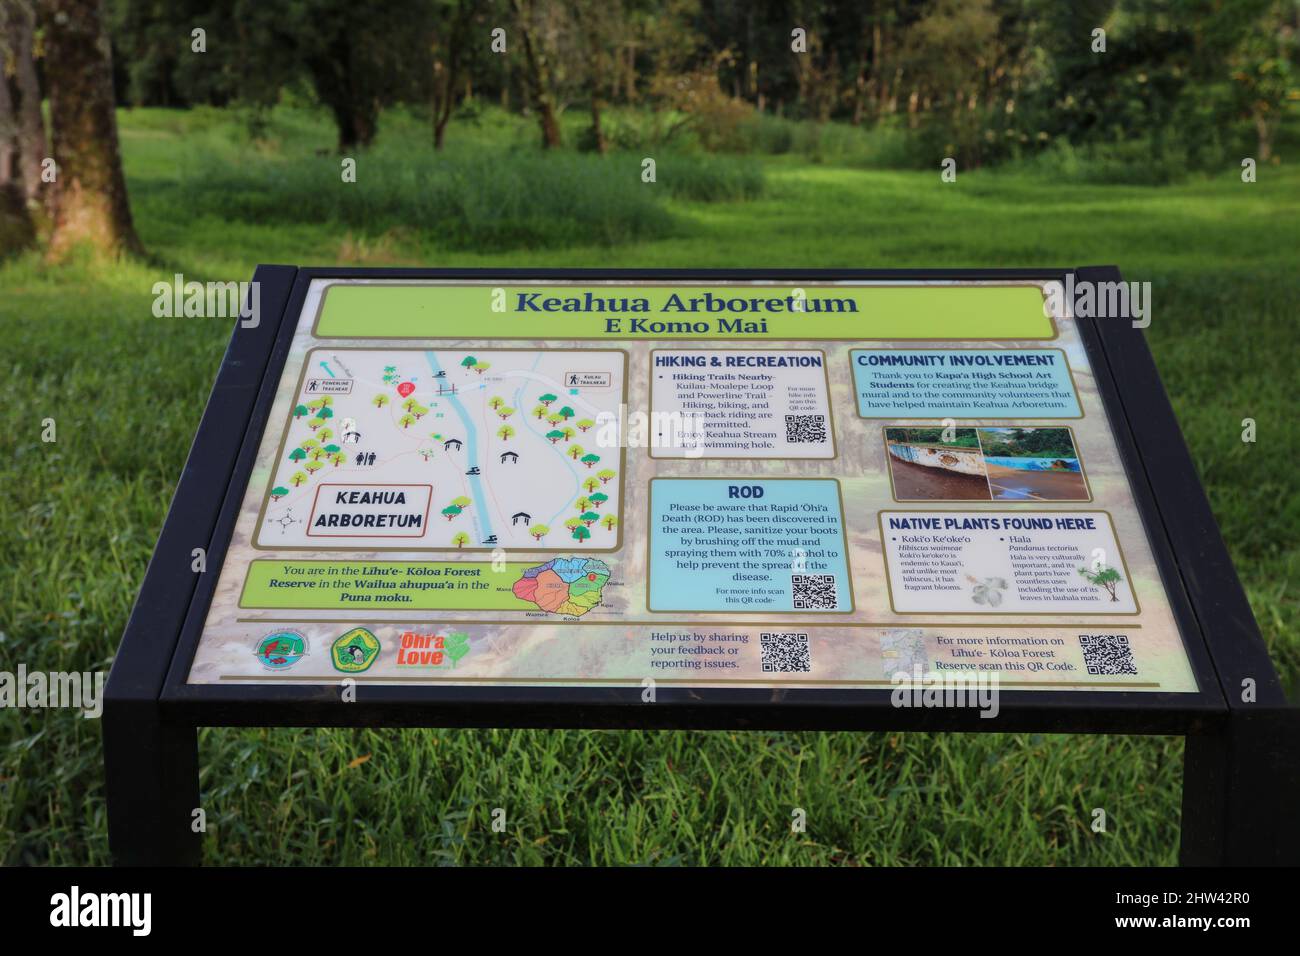 An informational sign at Keahu Arboretum in the Lihue-Koloa Forest Reserve in Kauai Stock Photo